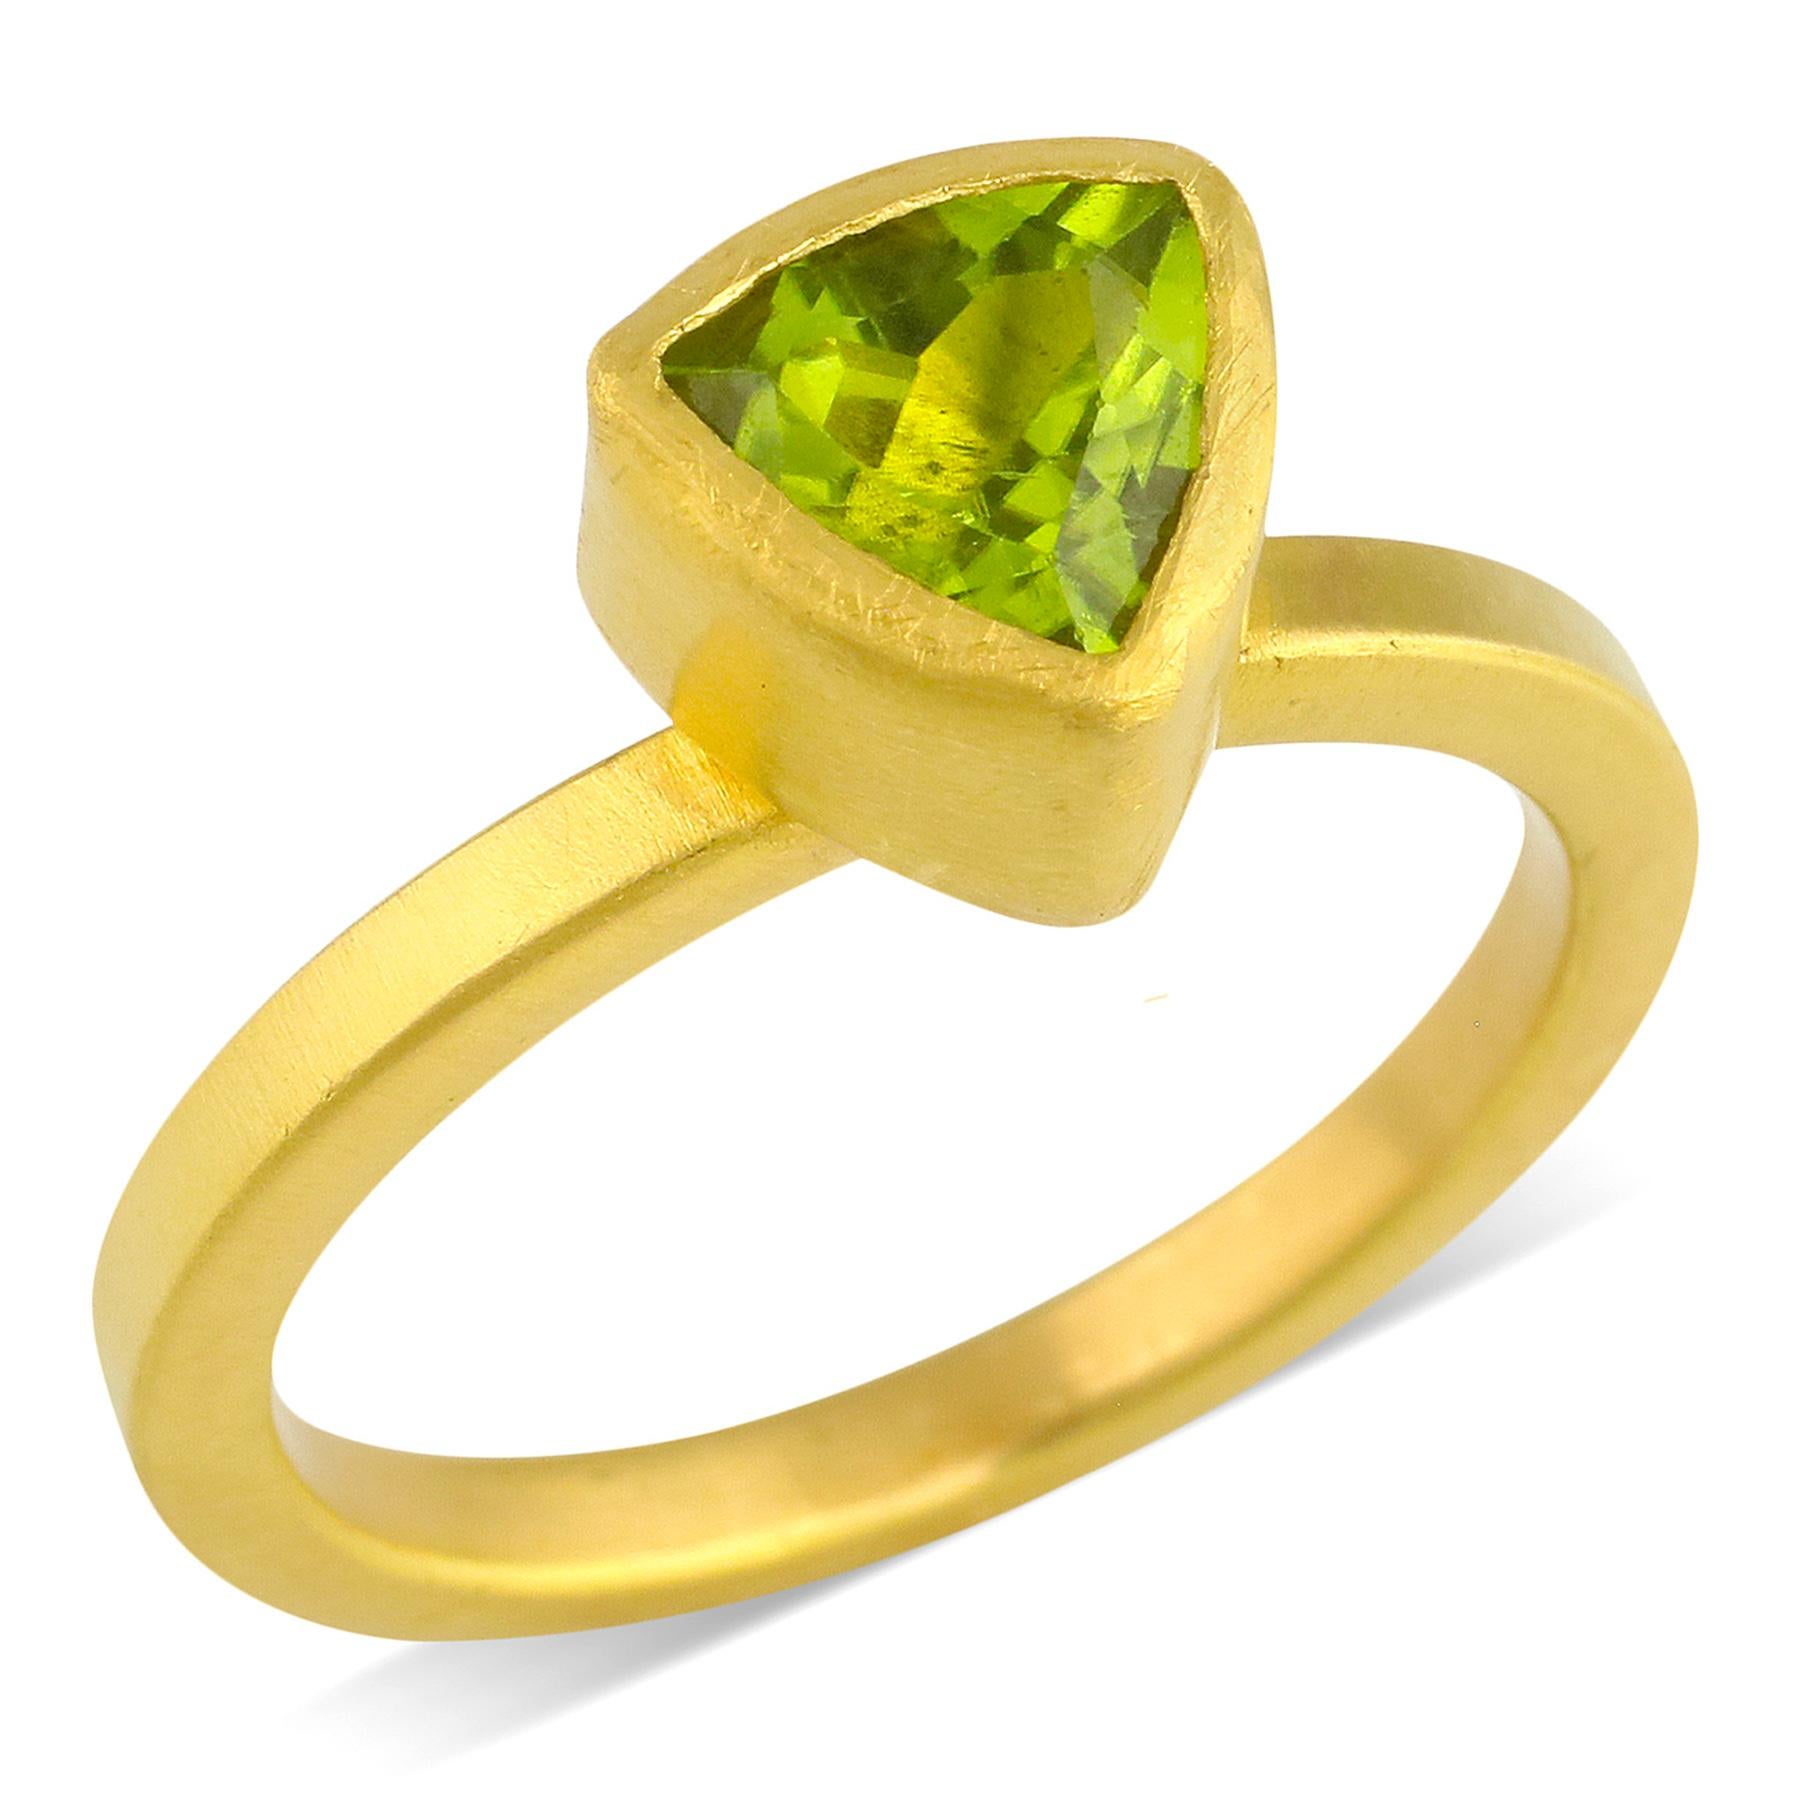 PHILIPPE-SPENCER -   1.4 Ct. Faceted Trillion Peridot wrapped in 22K Gold Bezel Setting, with Anvil-Forged Solid 20K Gold 2.25mm x 2mm Band. Heavy Brushed Exterior, Mirror Polish Interior.  Size 7, and is in-stock and ready to ship. Our apologies in